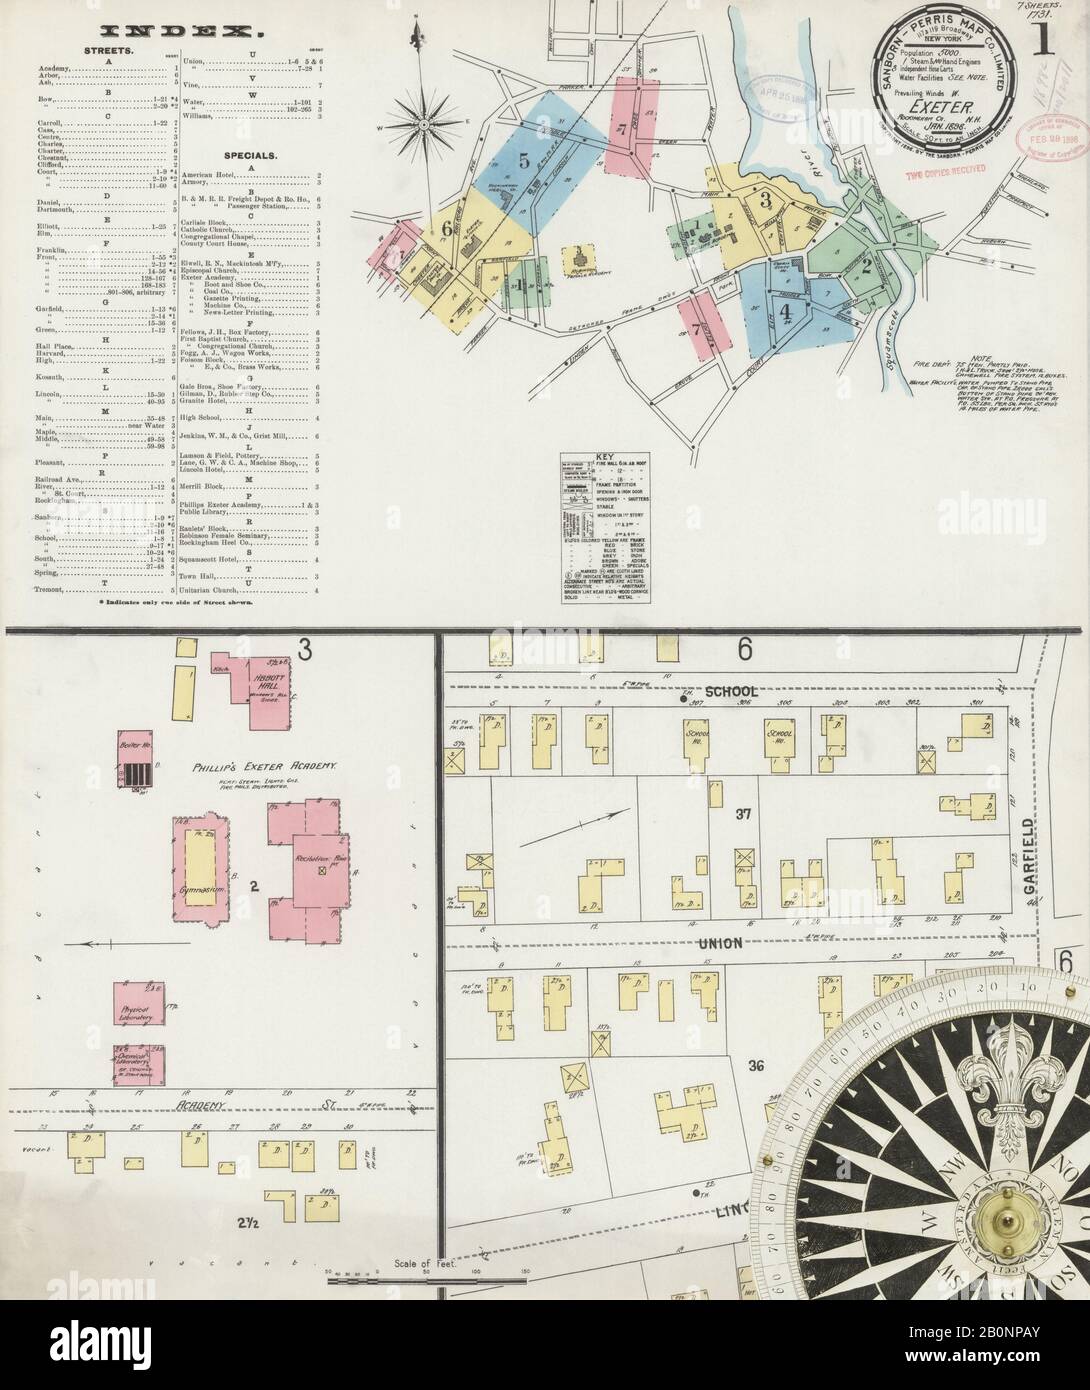 Image 1 of Sanborn Fire Insurance Map from Exeter, Rockingham County, New Hampshire. Jan 1898. 7 Sheet(s), America, street map with a Nineteenth Century compass Stock Photo